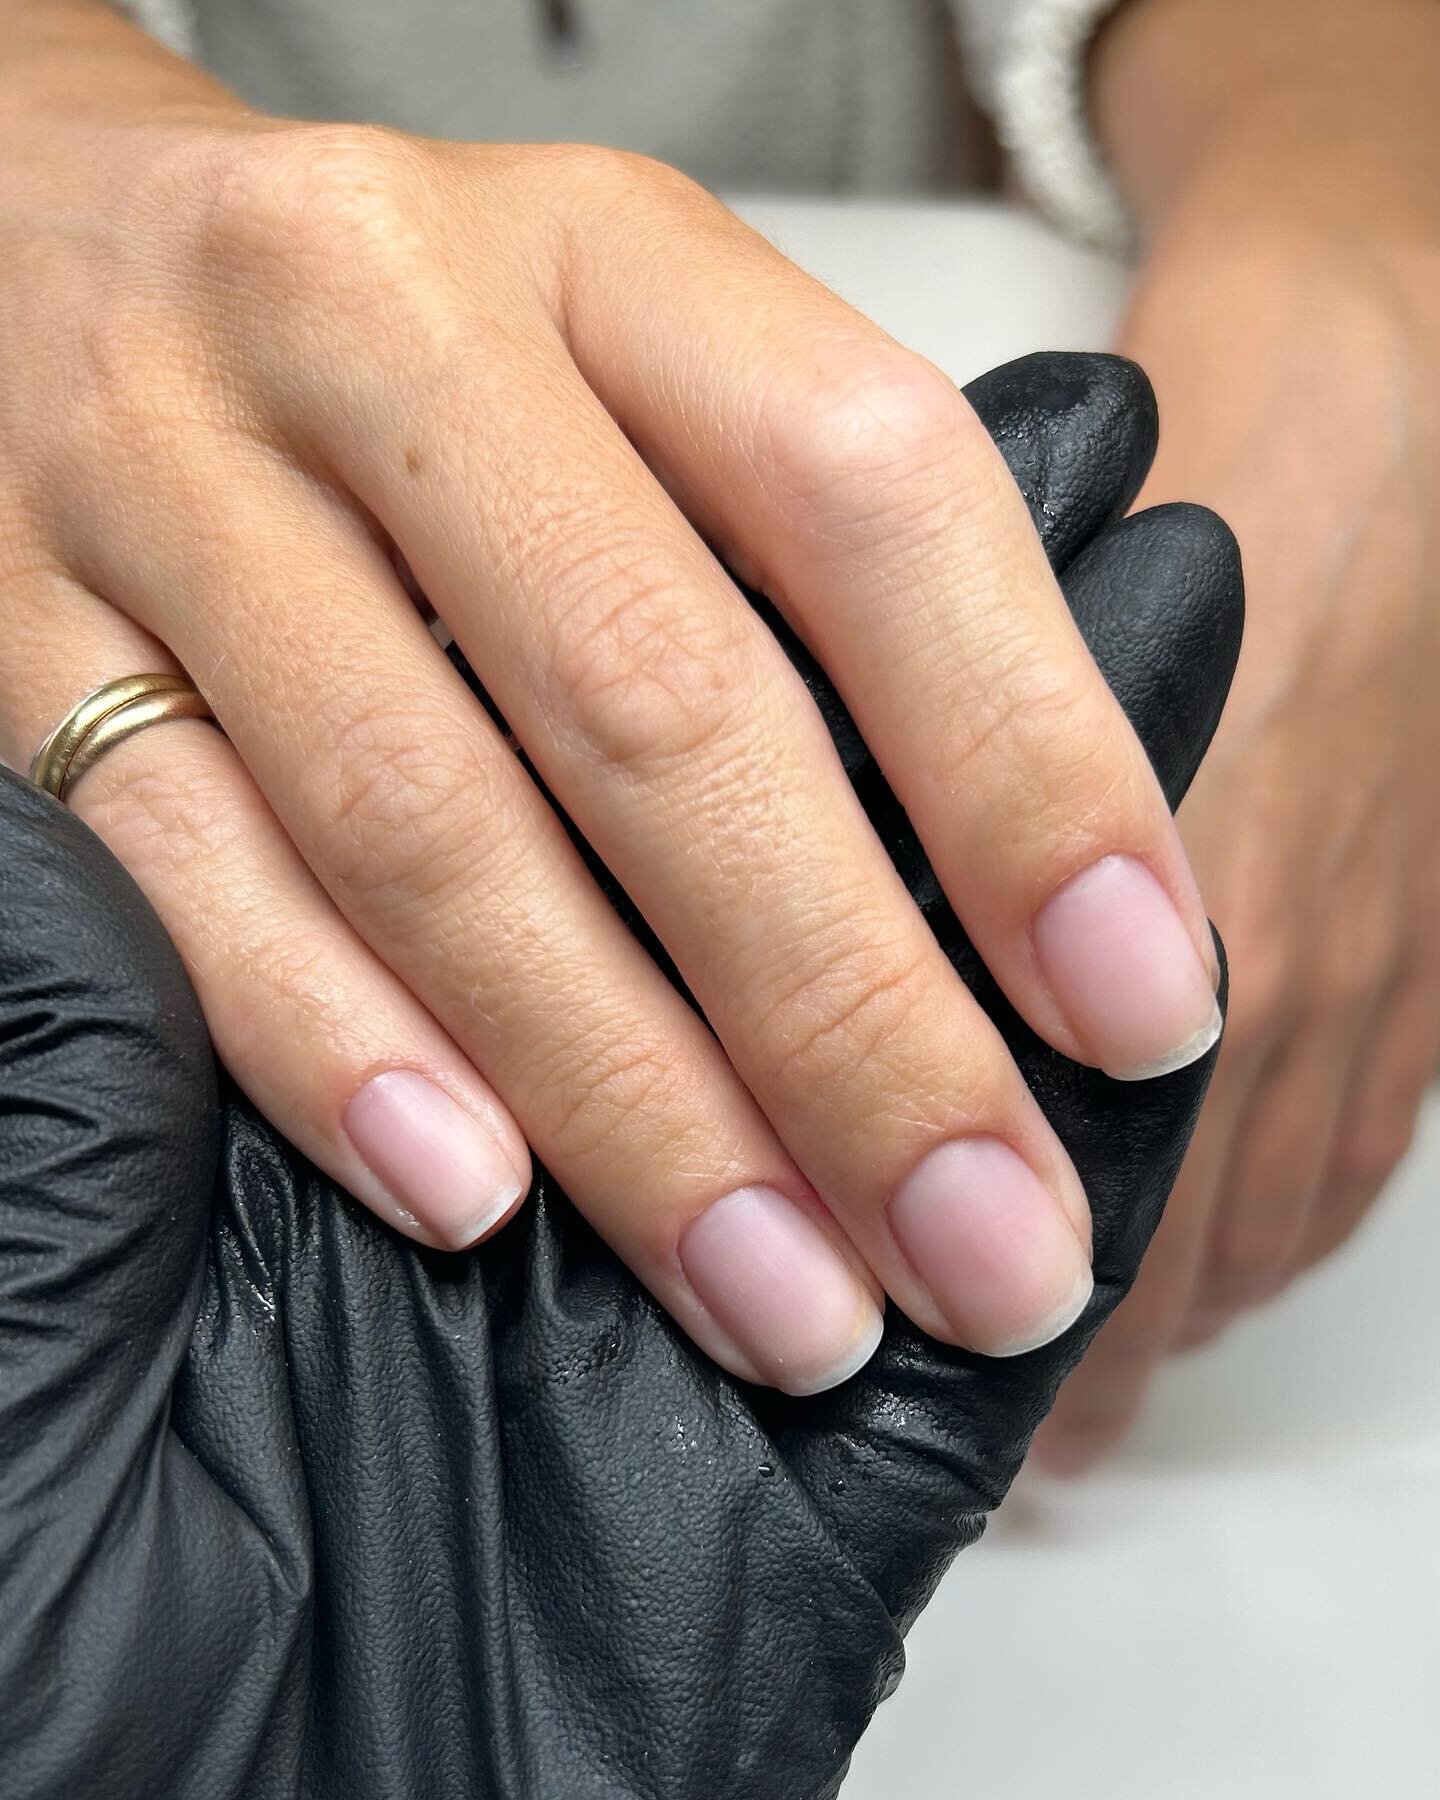 The perfectly prepped nail is the foundation for a flawless manicure. 

Clean natural healthy nails with zero damage after @biosculpturegelgb removal, perfectly prepped using British-made tools by @officialnavyprofessional, cleansed and hydrated usin